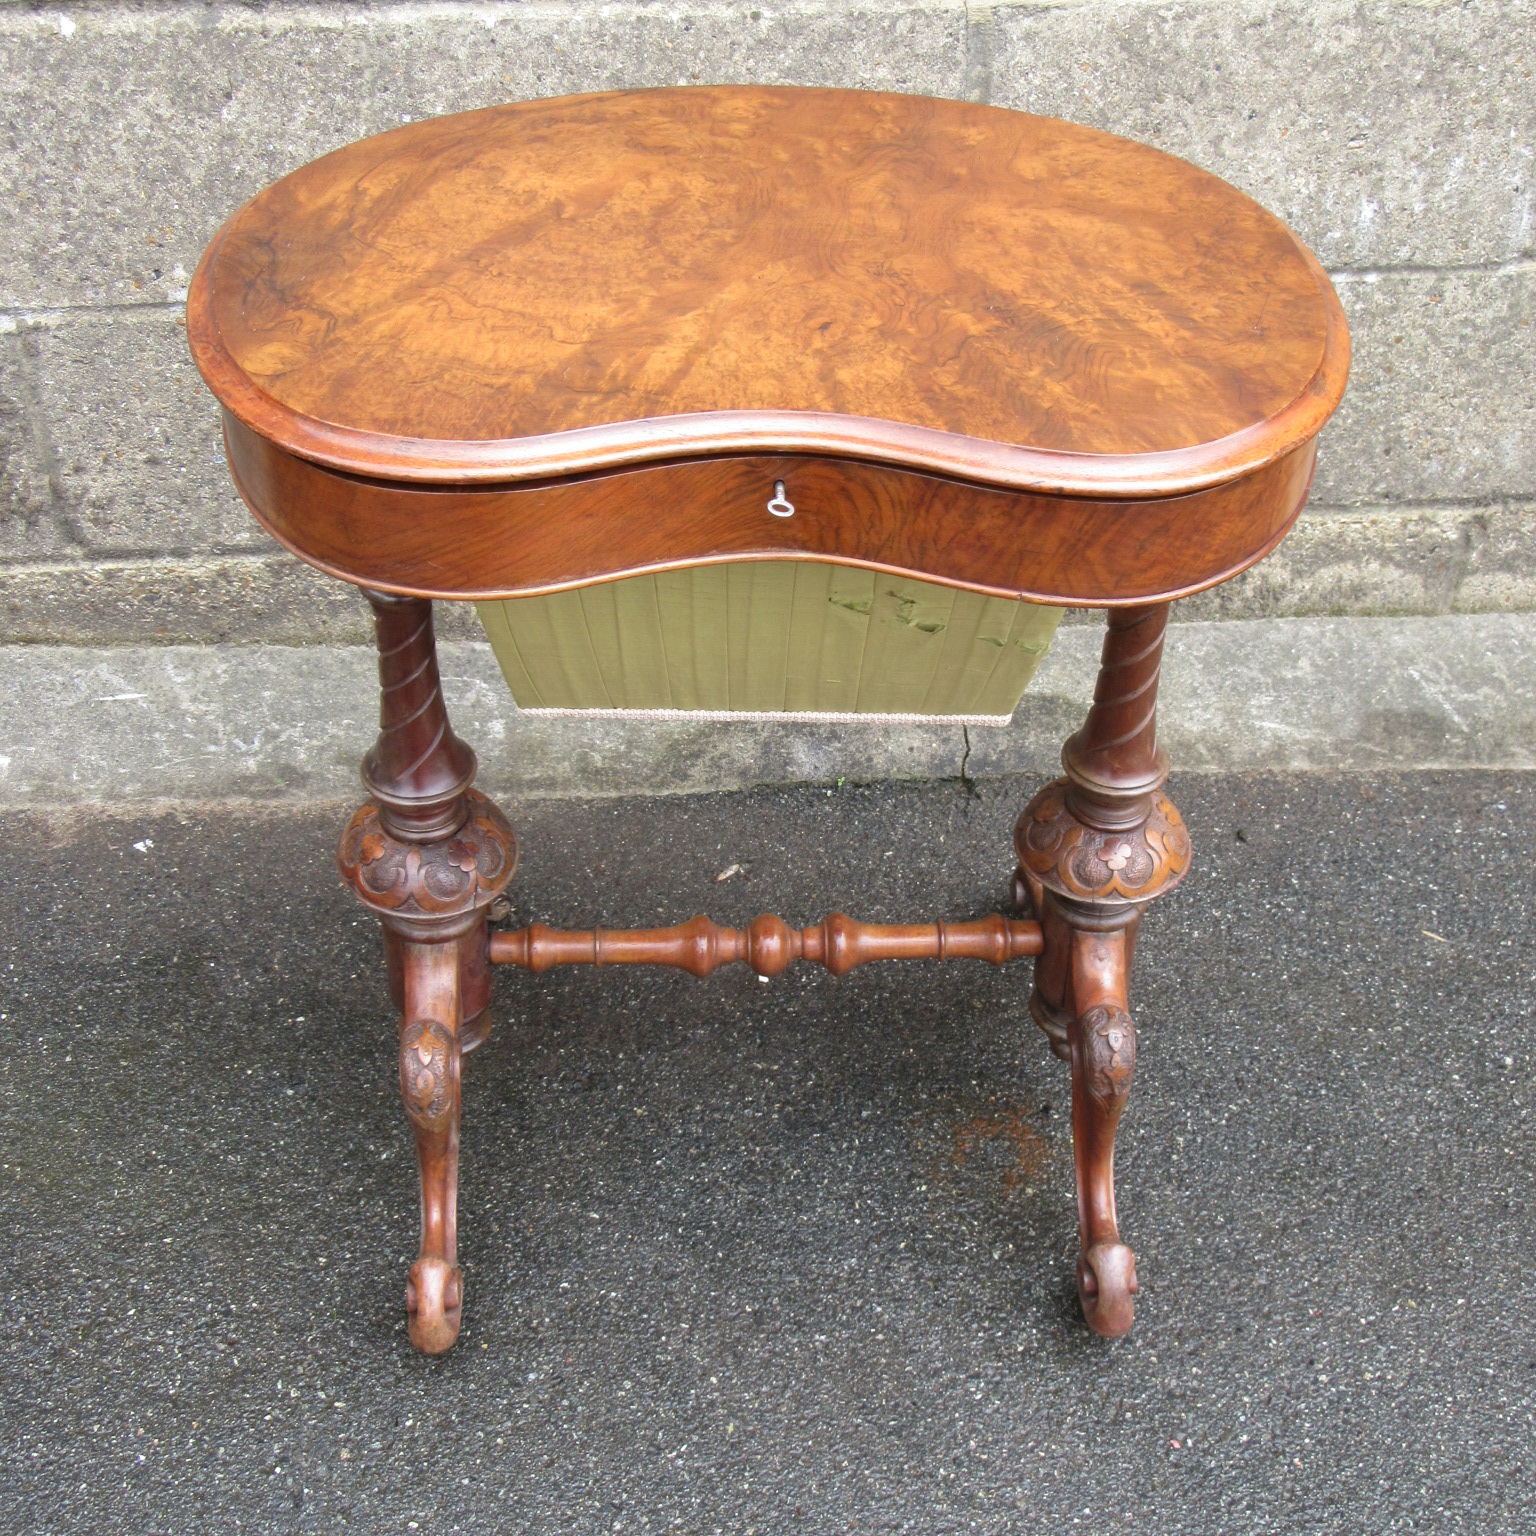 ANTIQUE VICTORIAN WALNUT SEWING TABLE